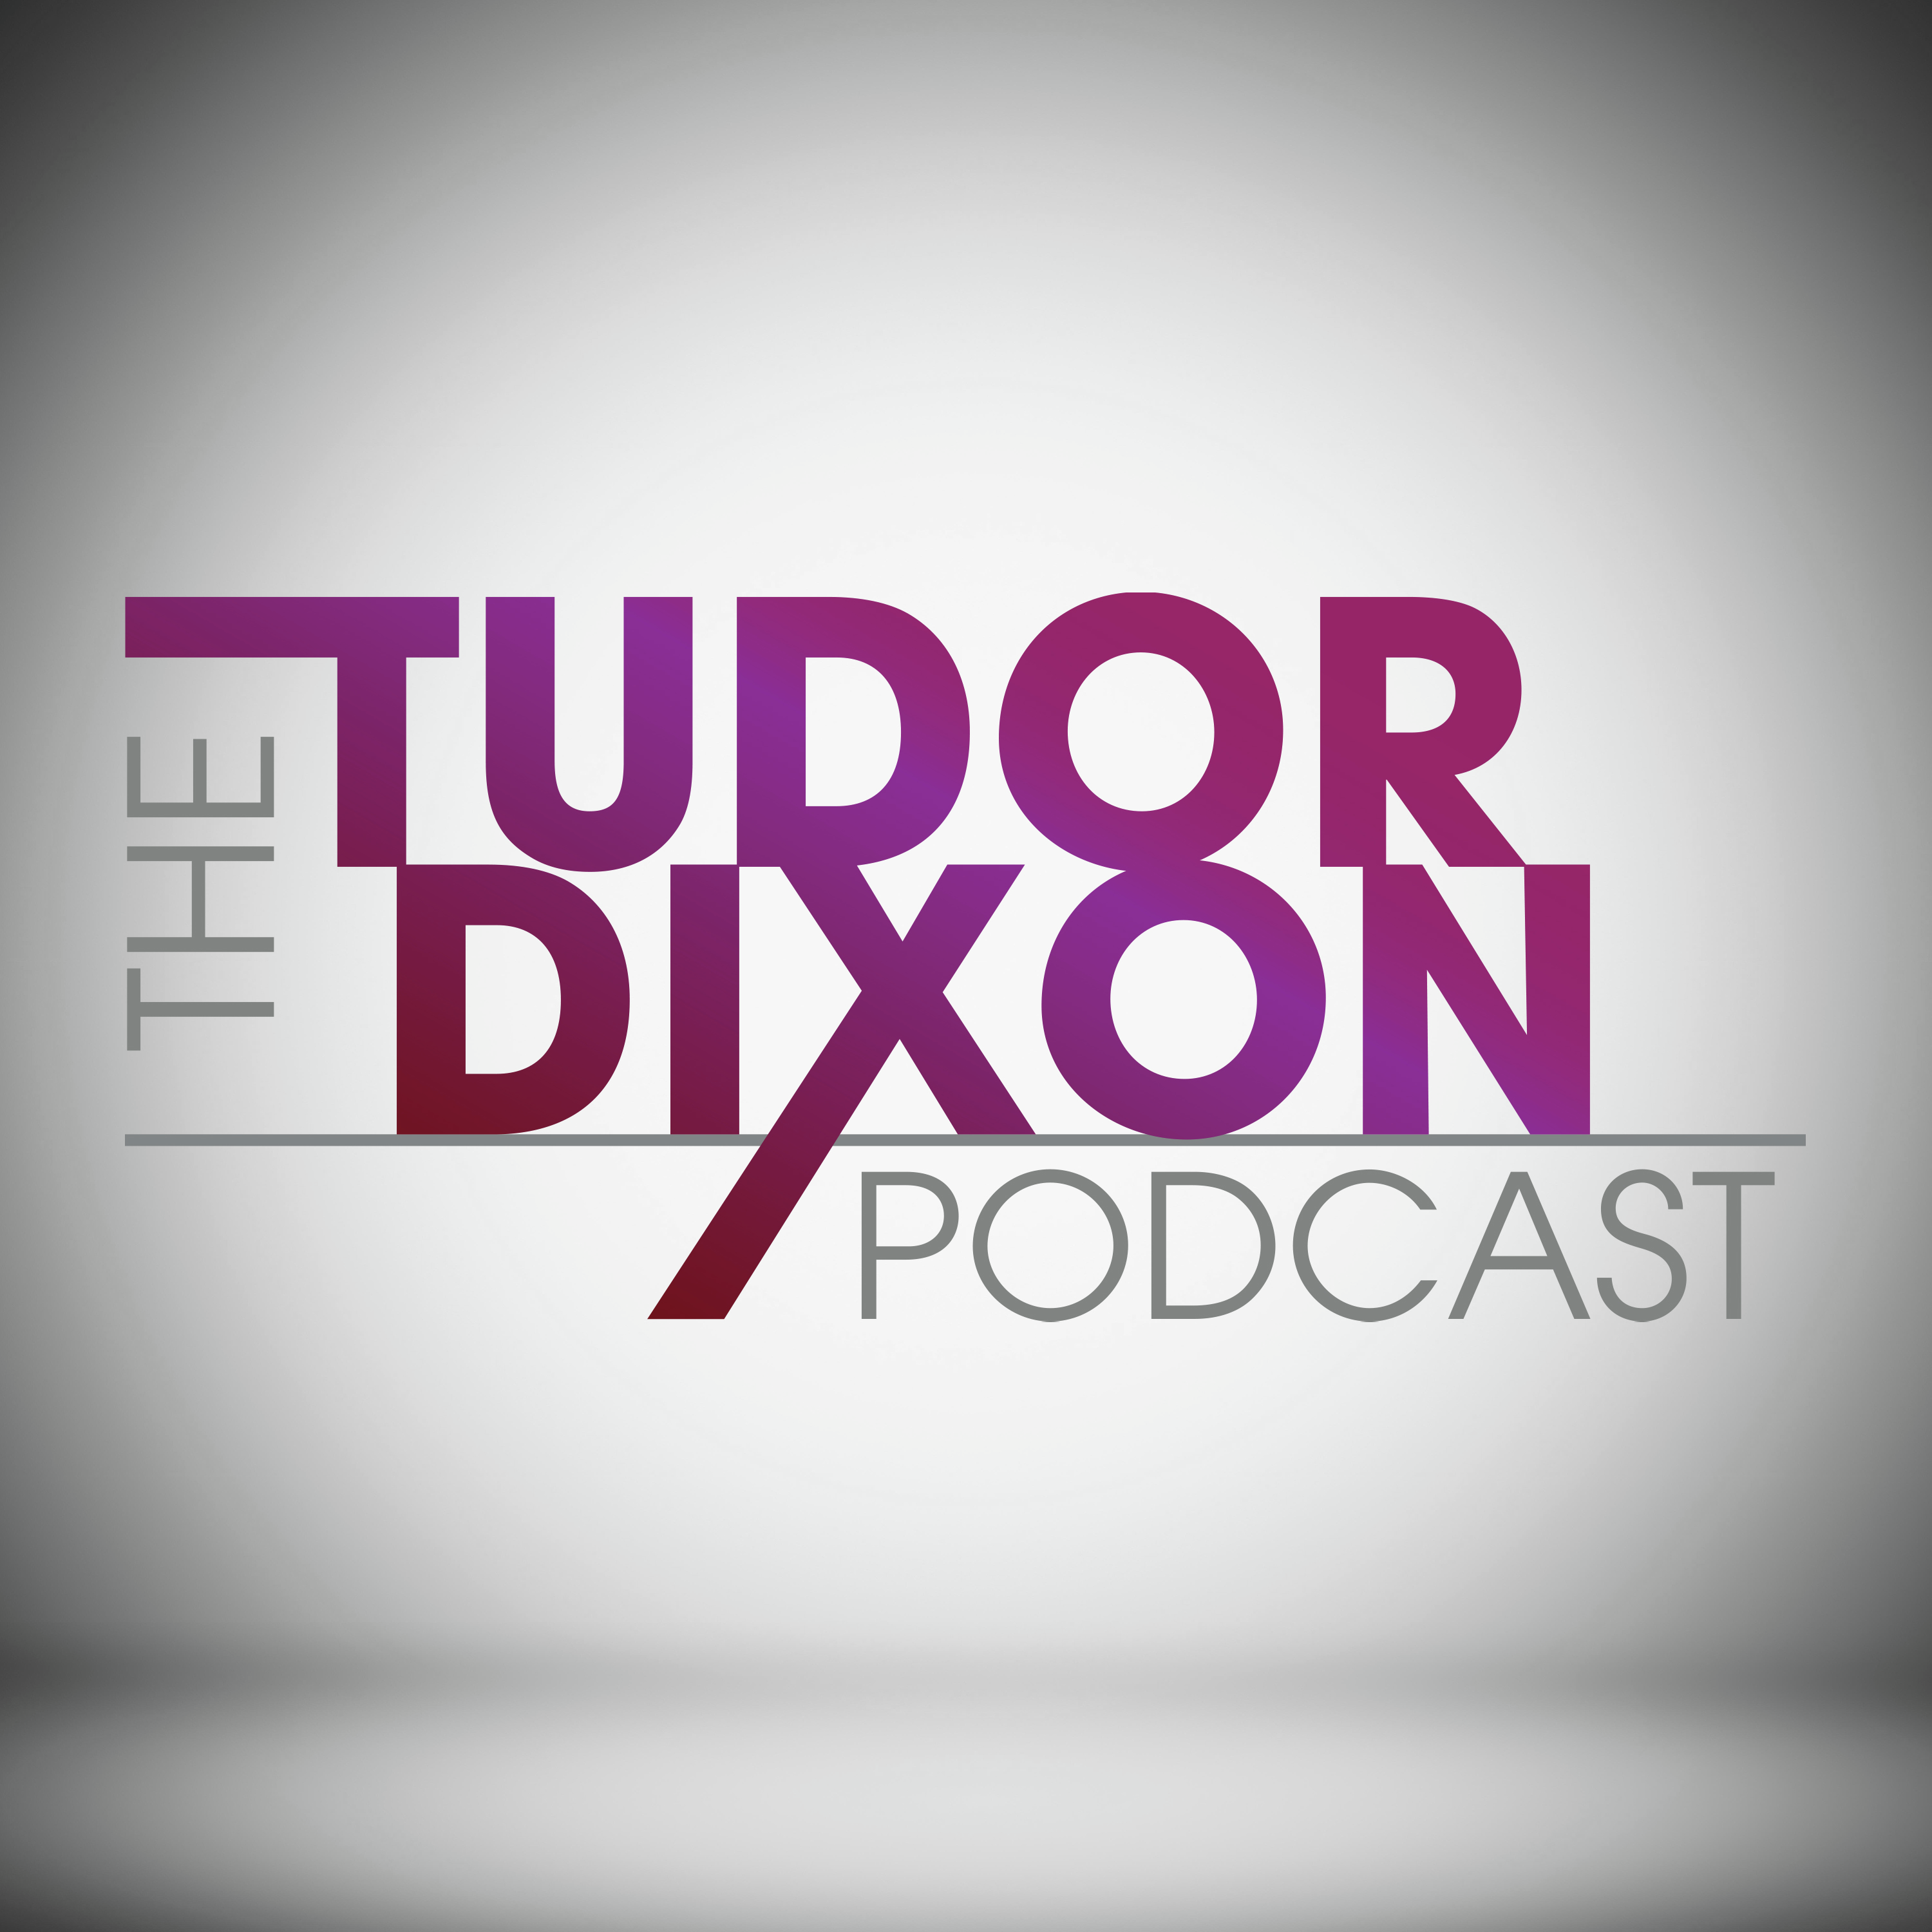 The Tudor Dixon Podcast: Can the Political Rhetoric Be Turned Down in America?